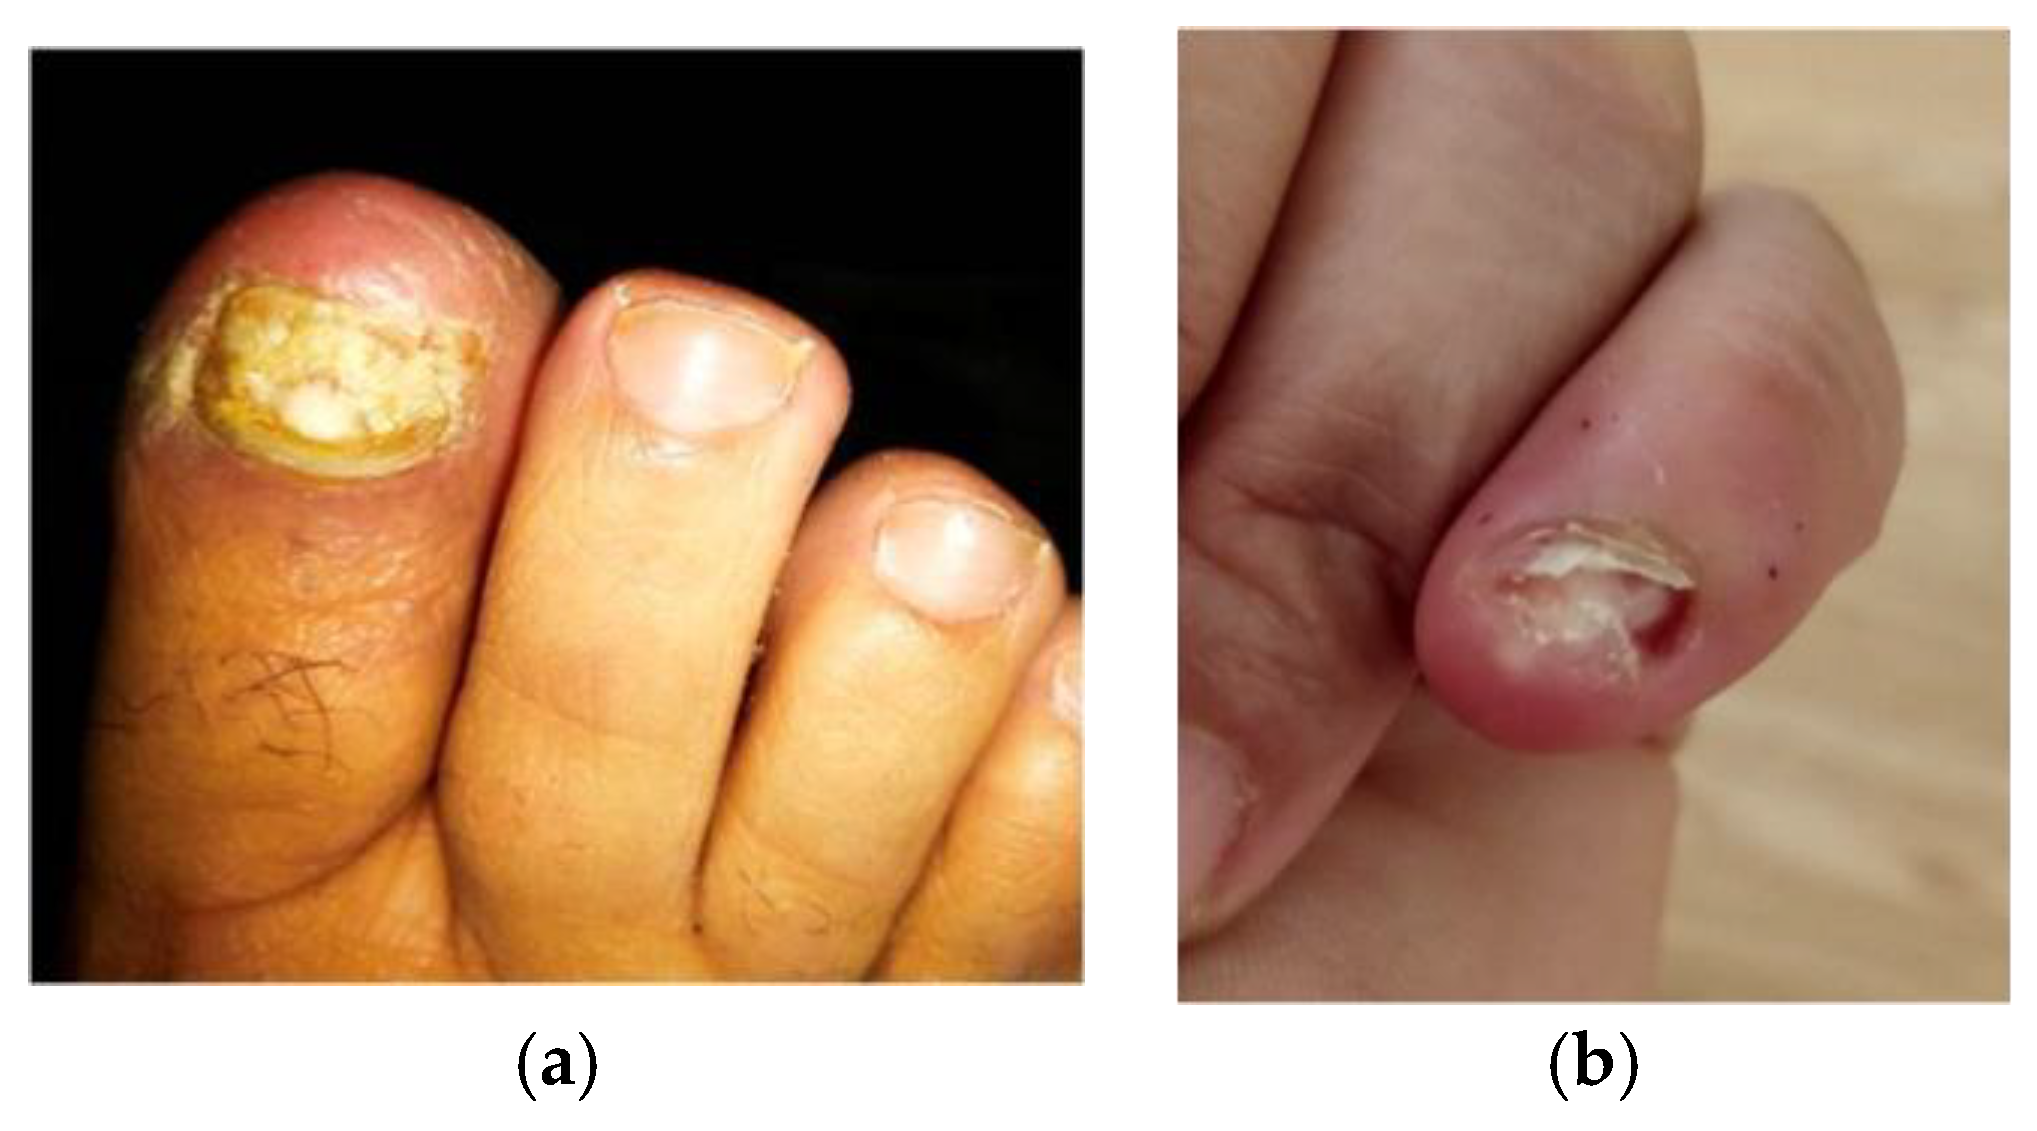 Pseudomonas infection of nail: Green nail syndrome secondary to  onychomycosis - Cosmoderma